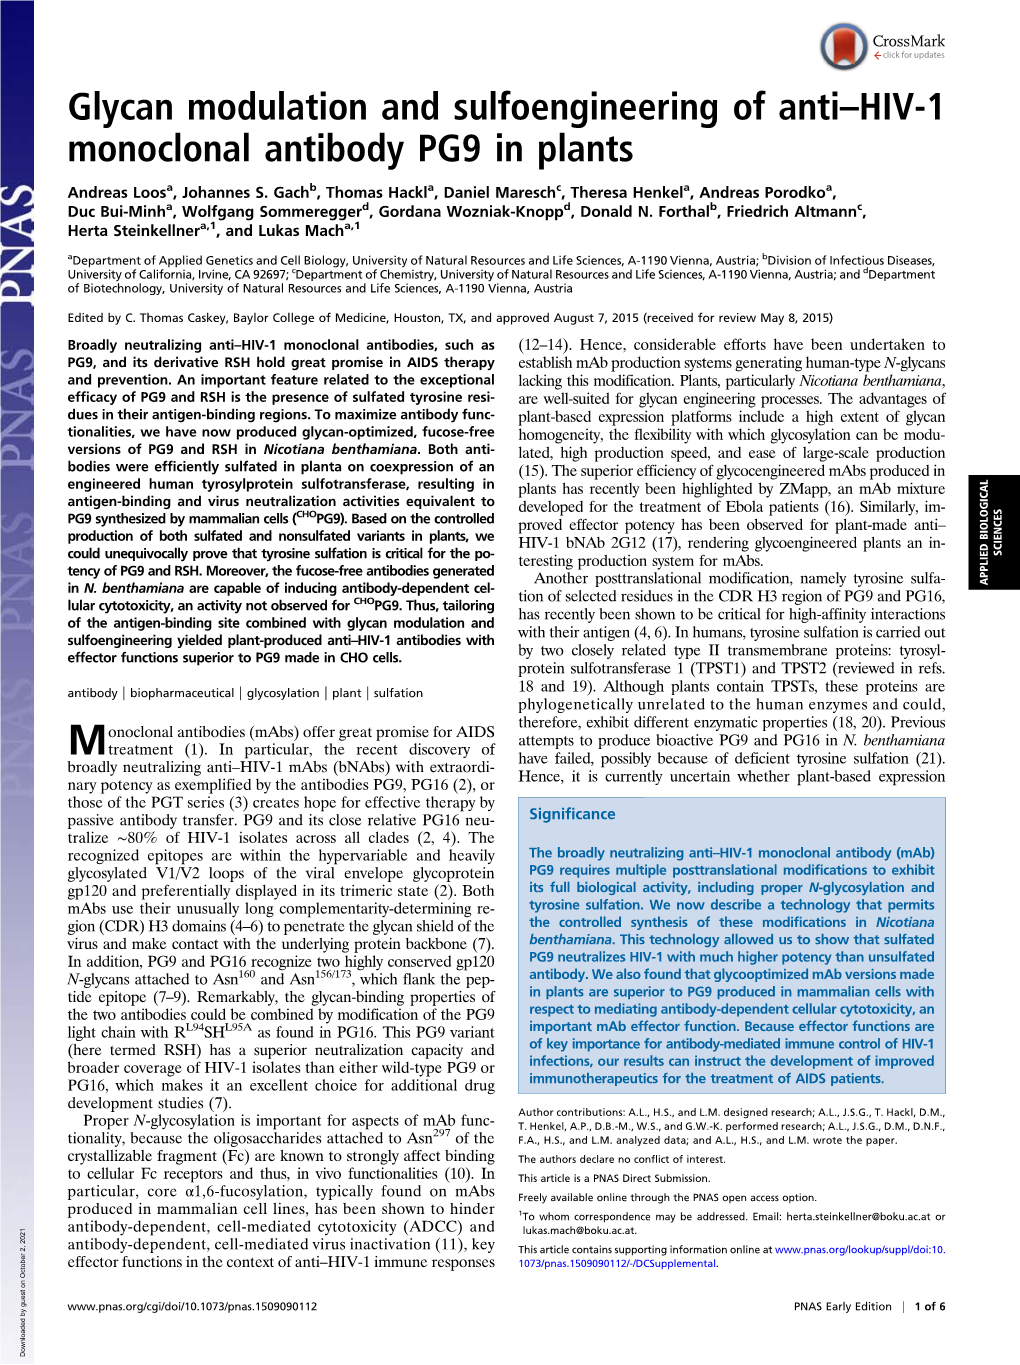 Glycan Modulation and Sulfoengineering of Anti–HIV-1 Monoclonal Antibody PG9 in Plants